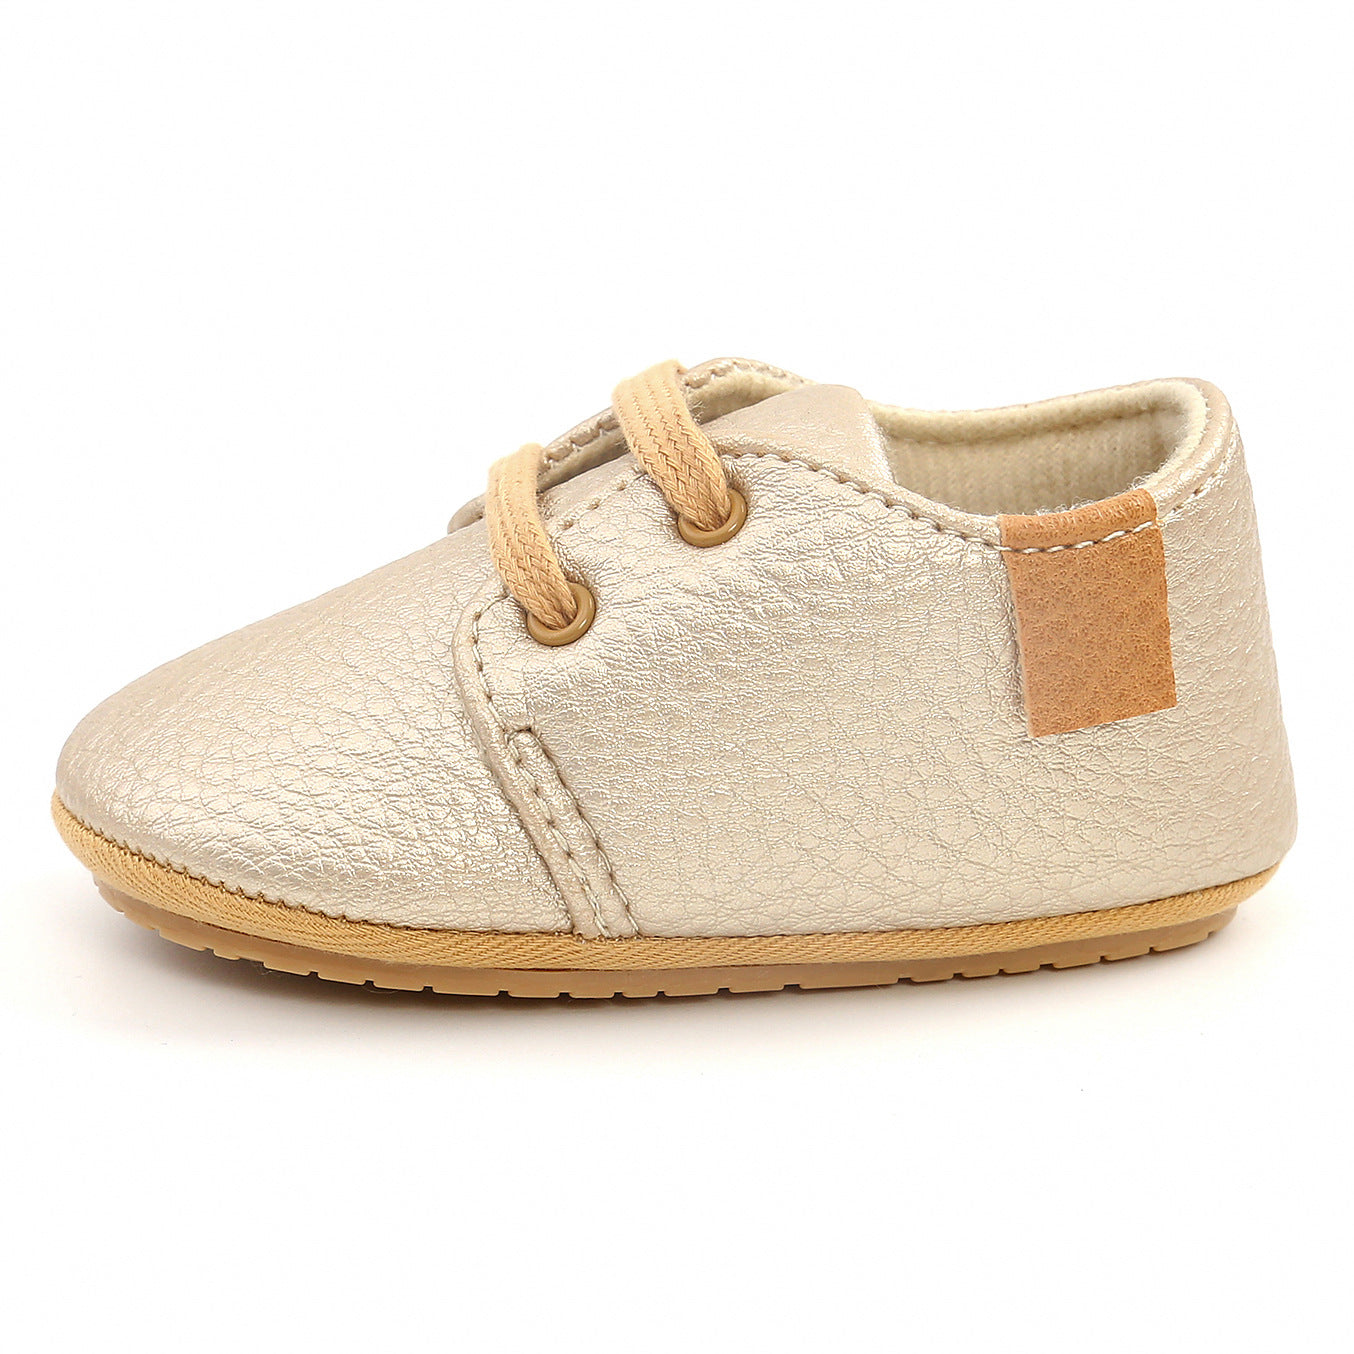 Baby boy shoes